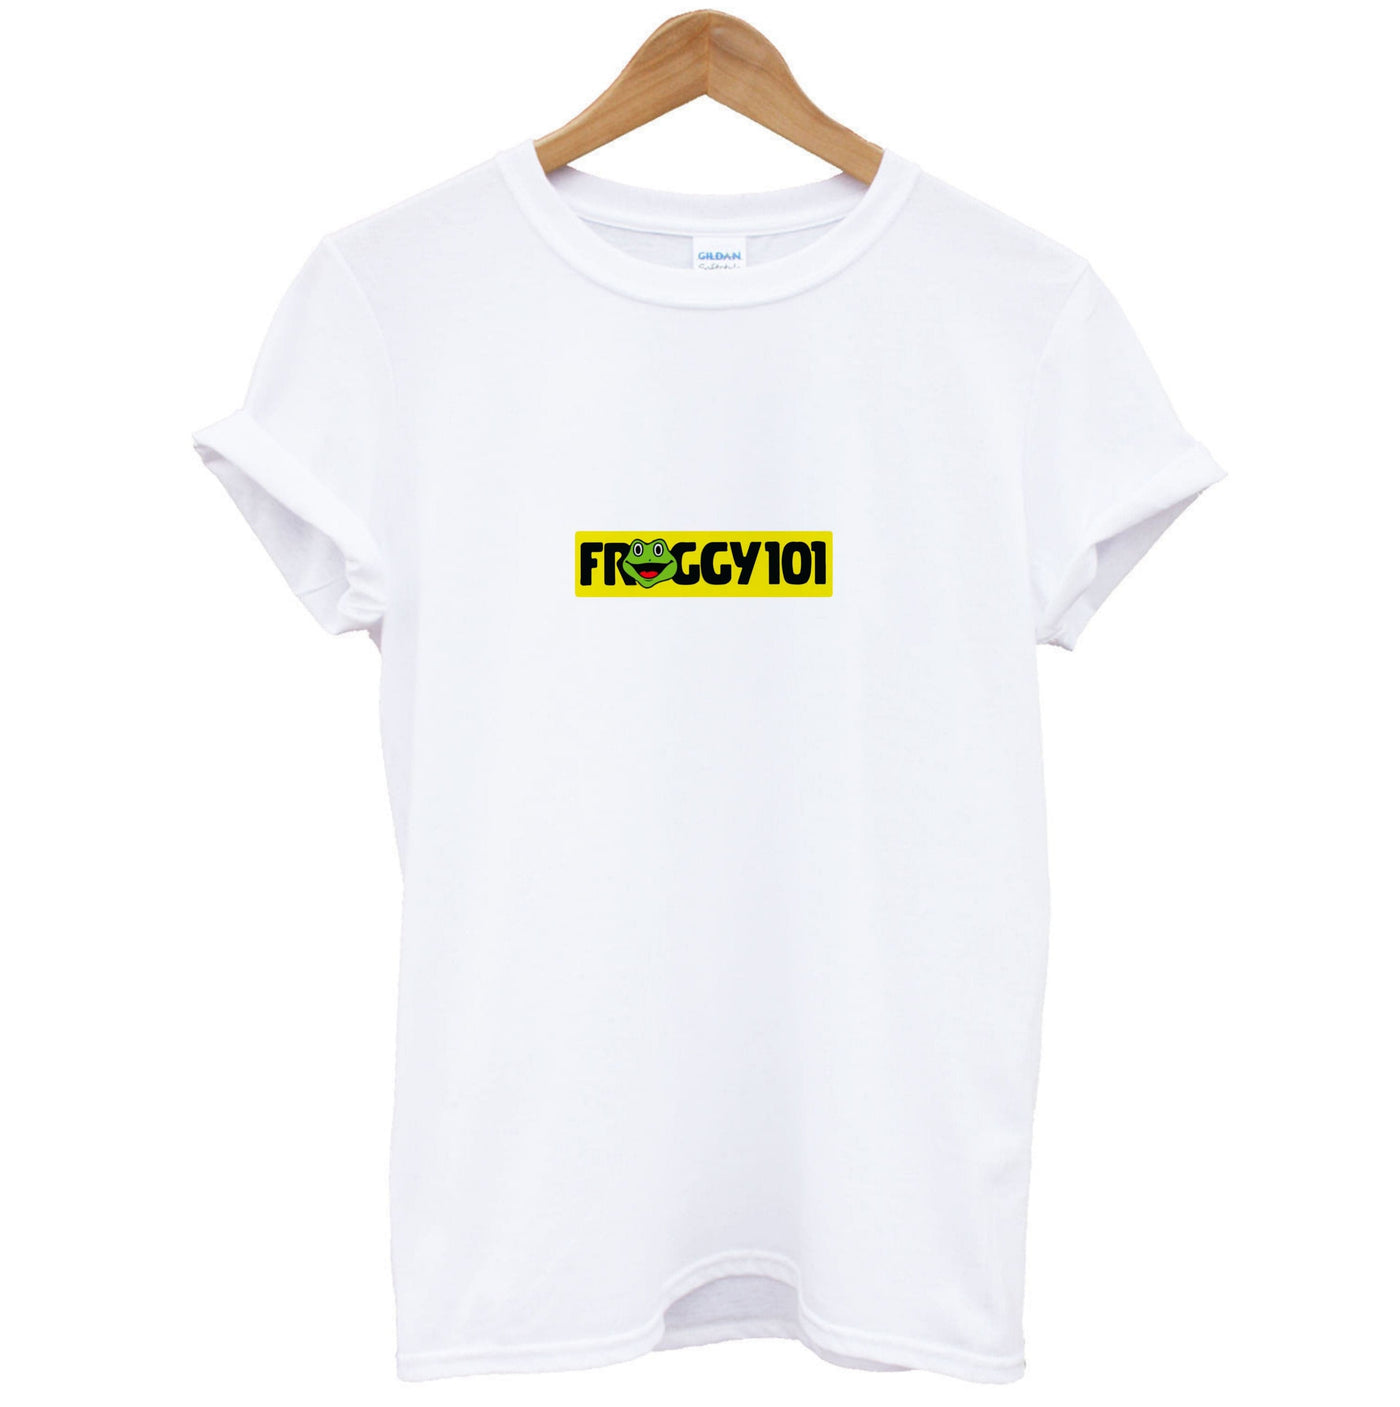 Froggy 101 - The Office T-Shirt